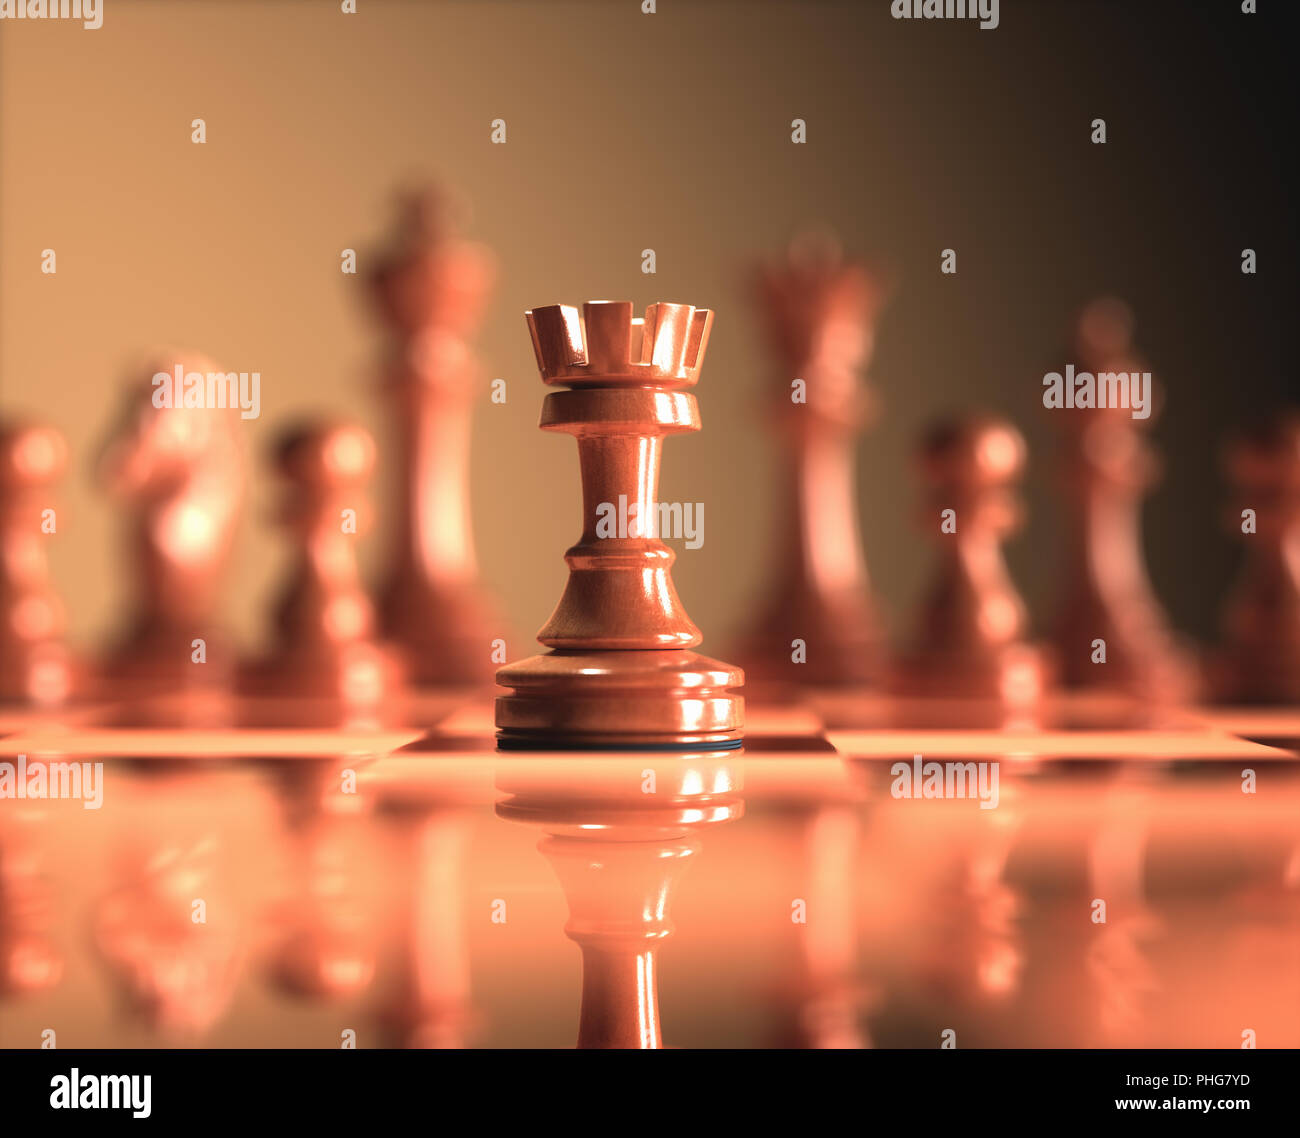 The Rook in highlight. Pieces of chess game, image with shallow depth of field. Stock Photo